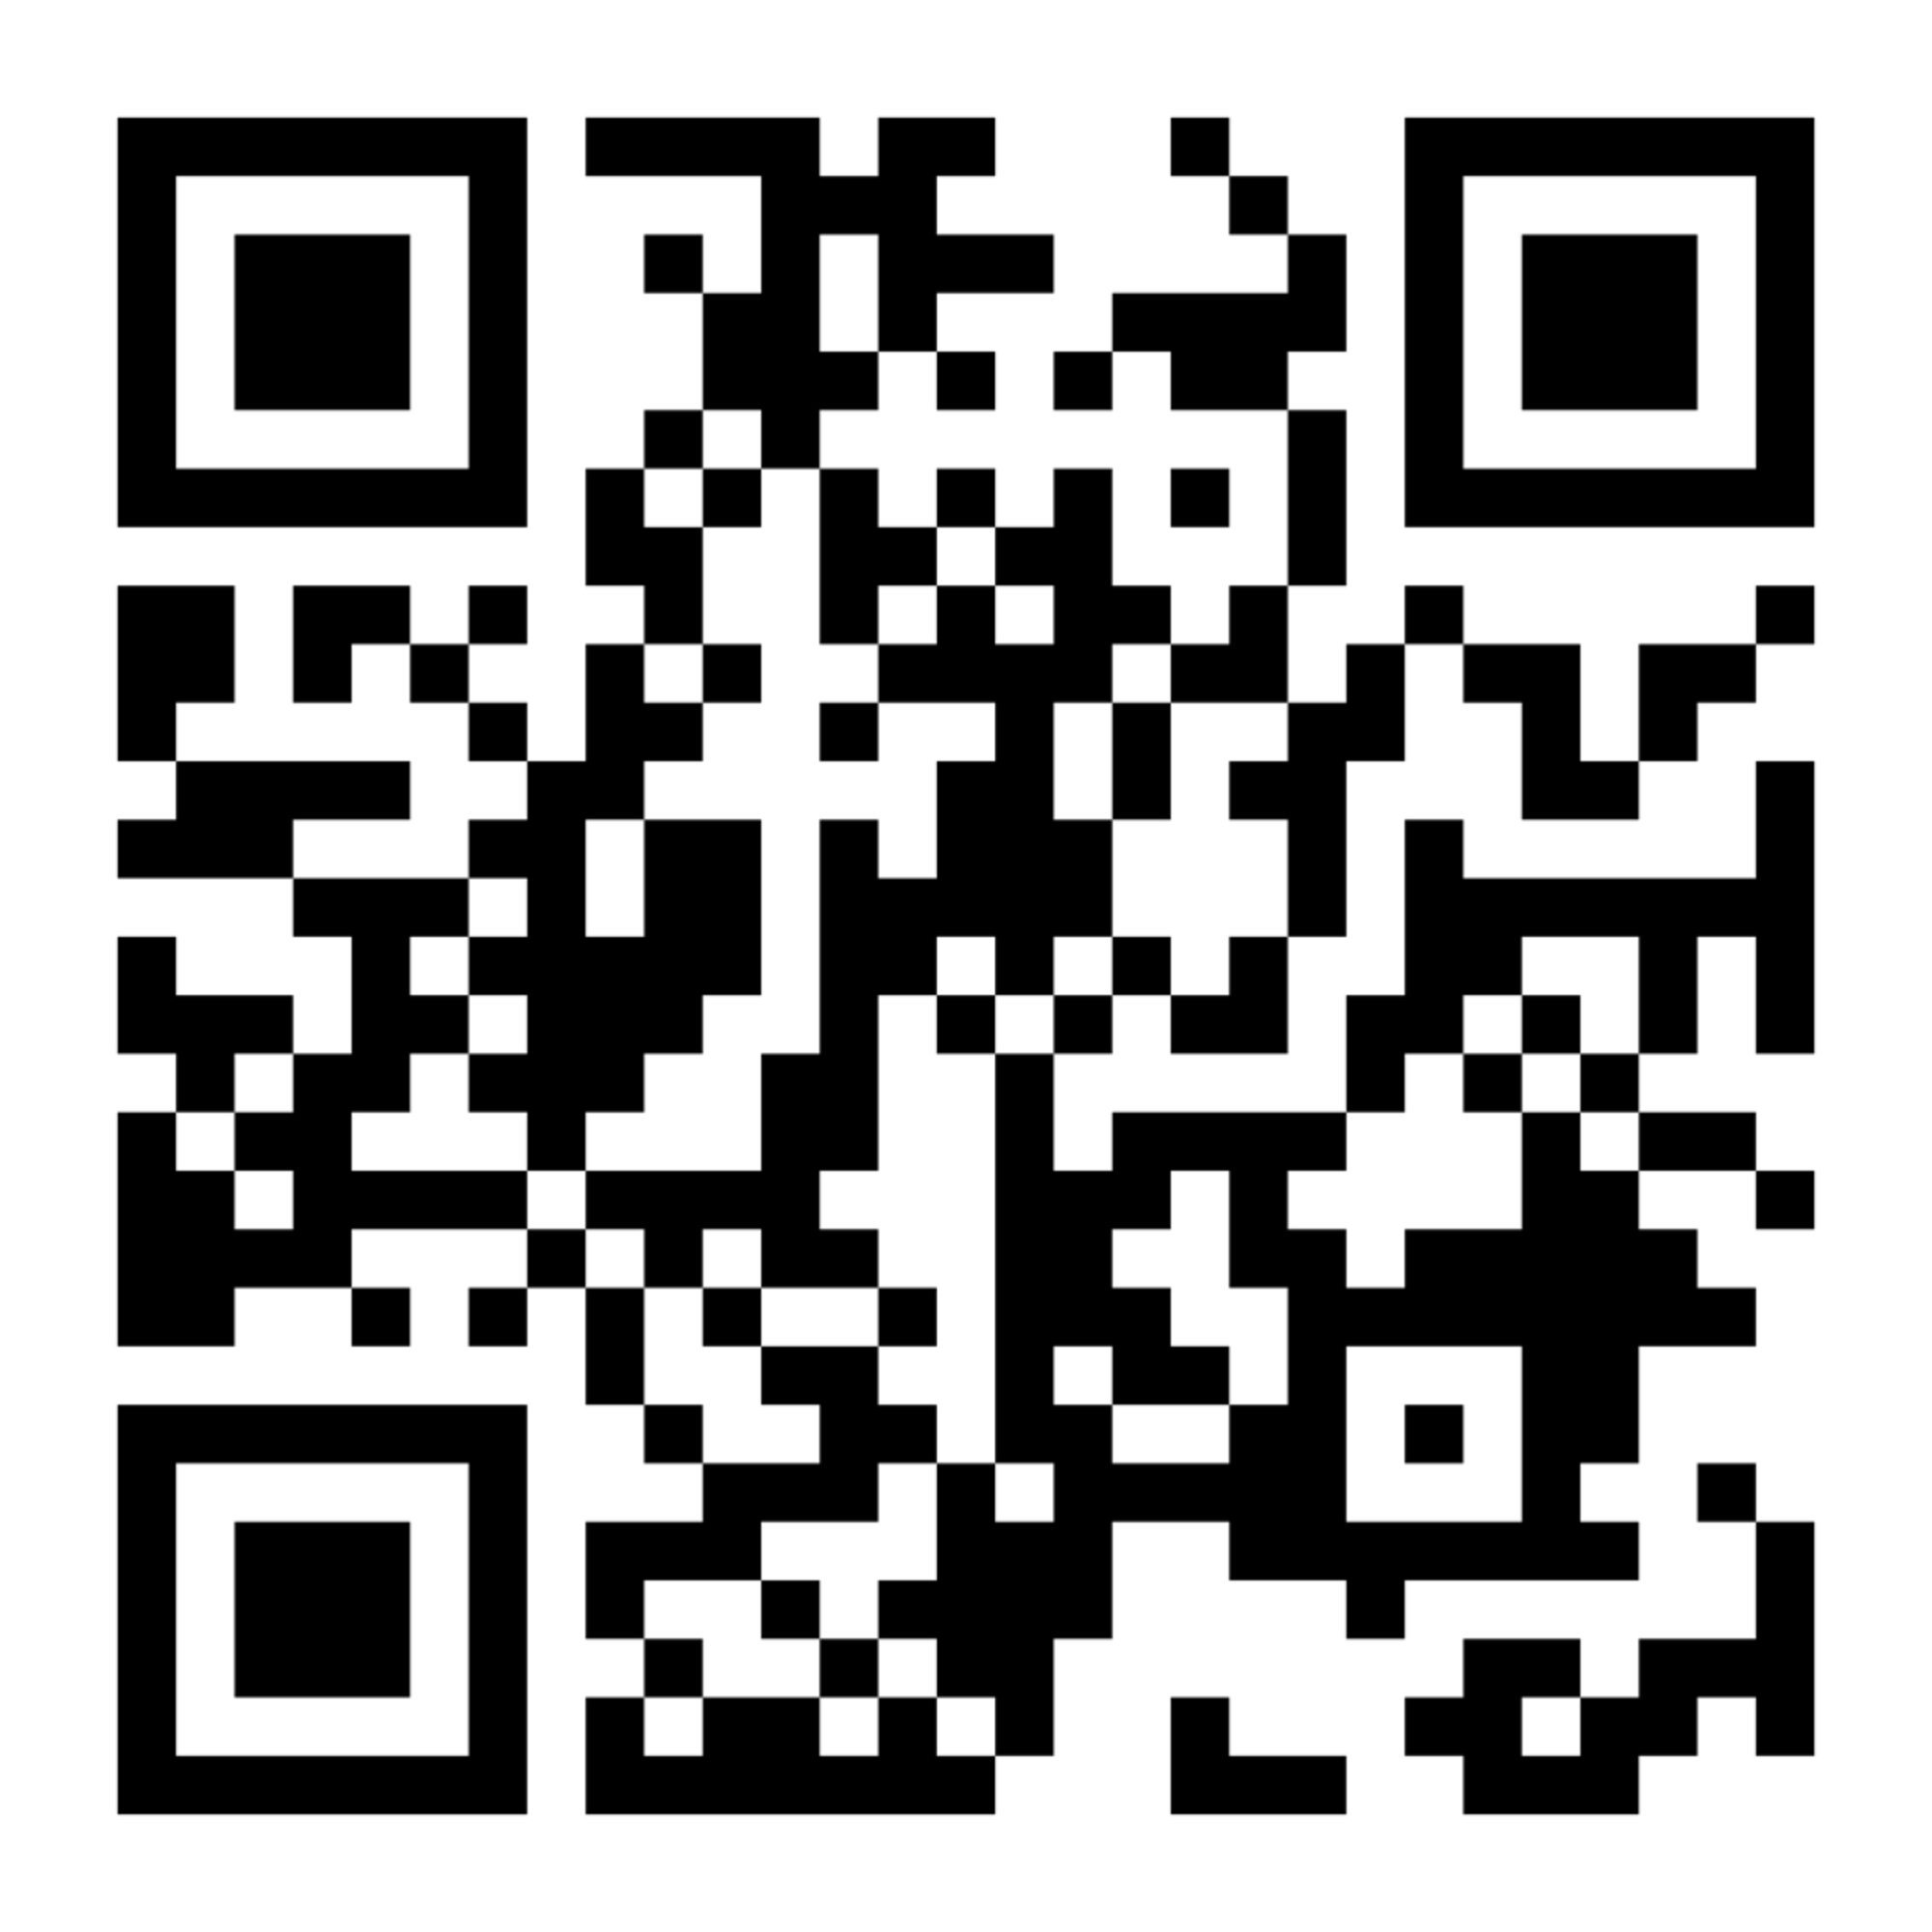 QR code for Team Kirtland Air Force Assistance Fund Campaign